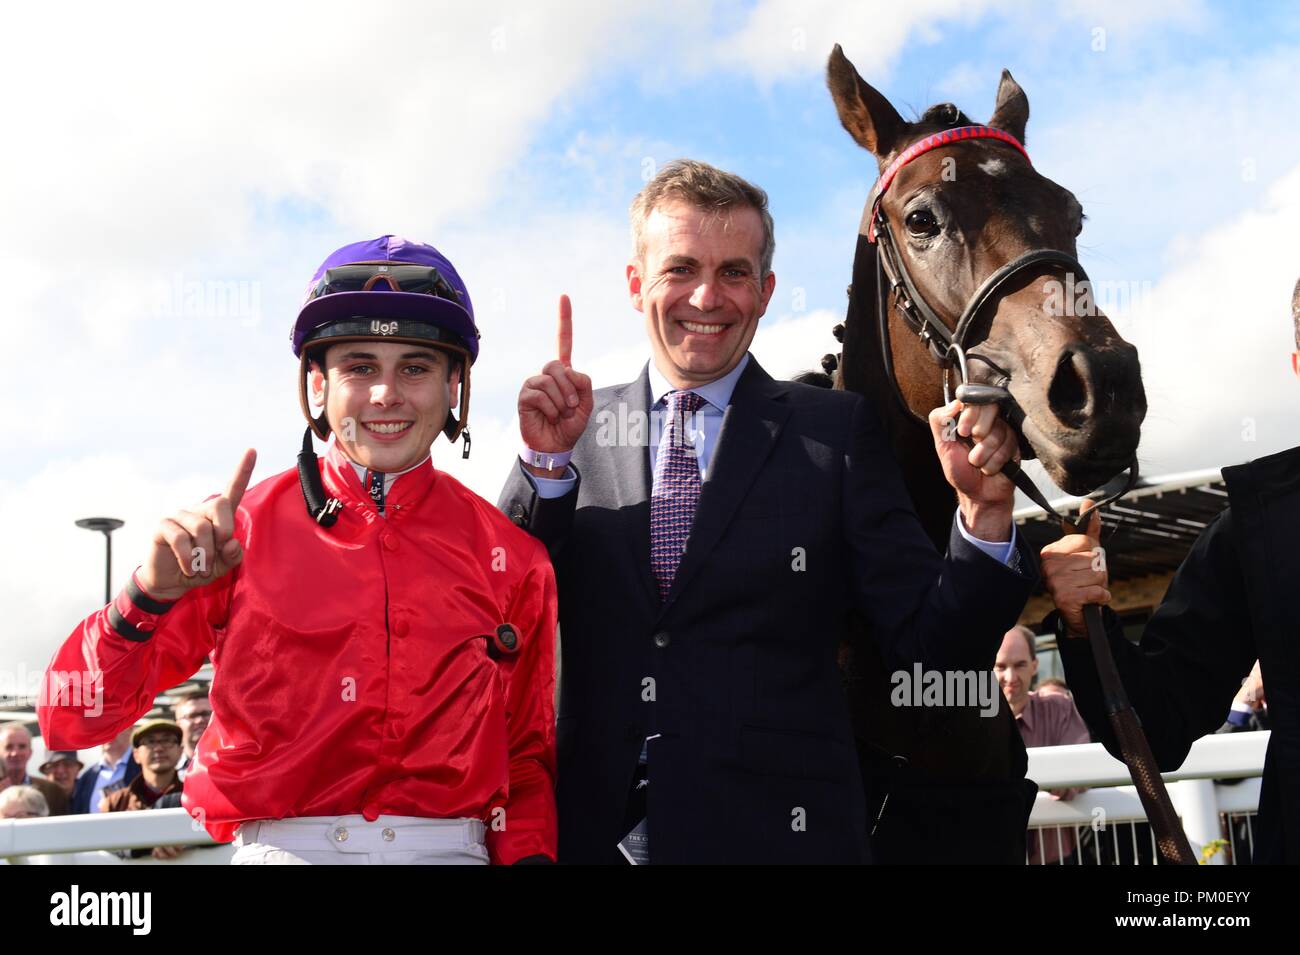 Jockey Ronan Whelan (left) celebrates winning the Moyglare Stud Stakes on Skitter Scatter alongside trainer Patrick Prendergast during day two of the 2018 Longines Irish Champions Weekend at Curragh racecourse County Neath. Stock Photo